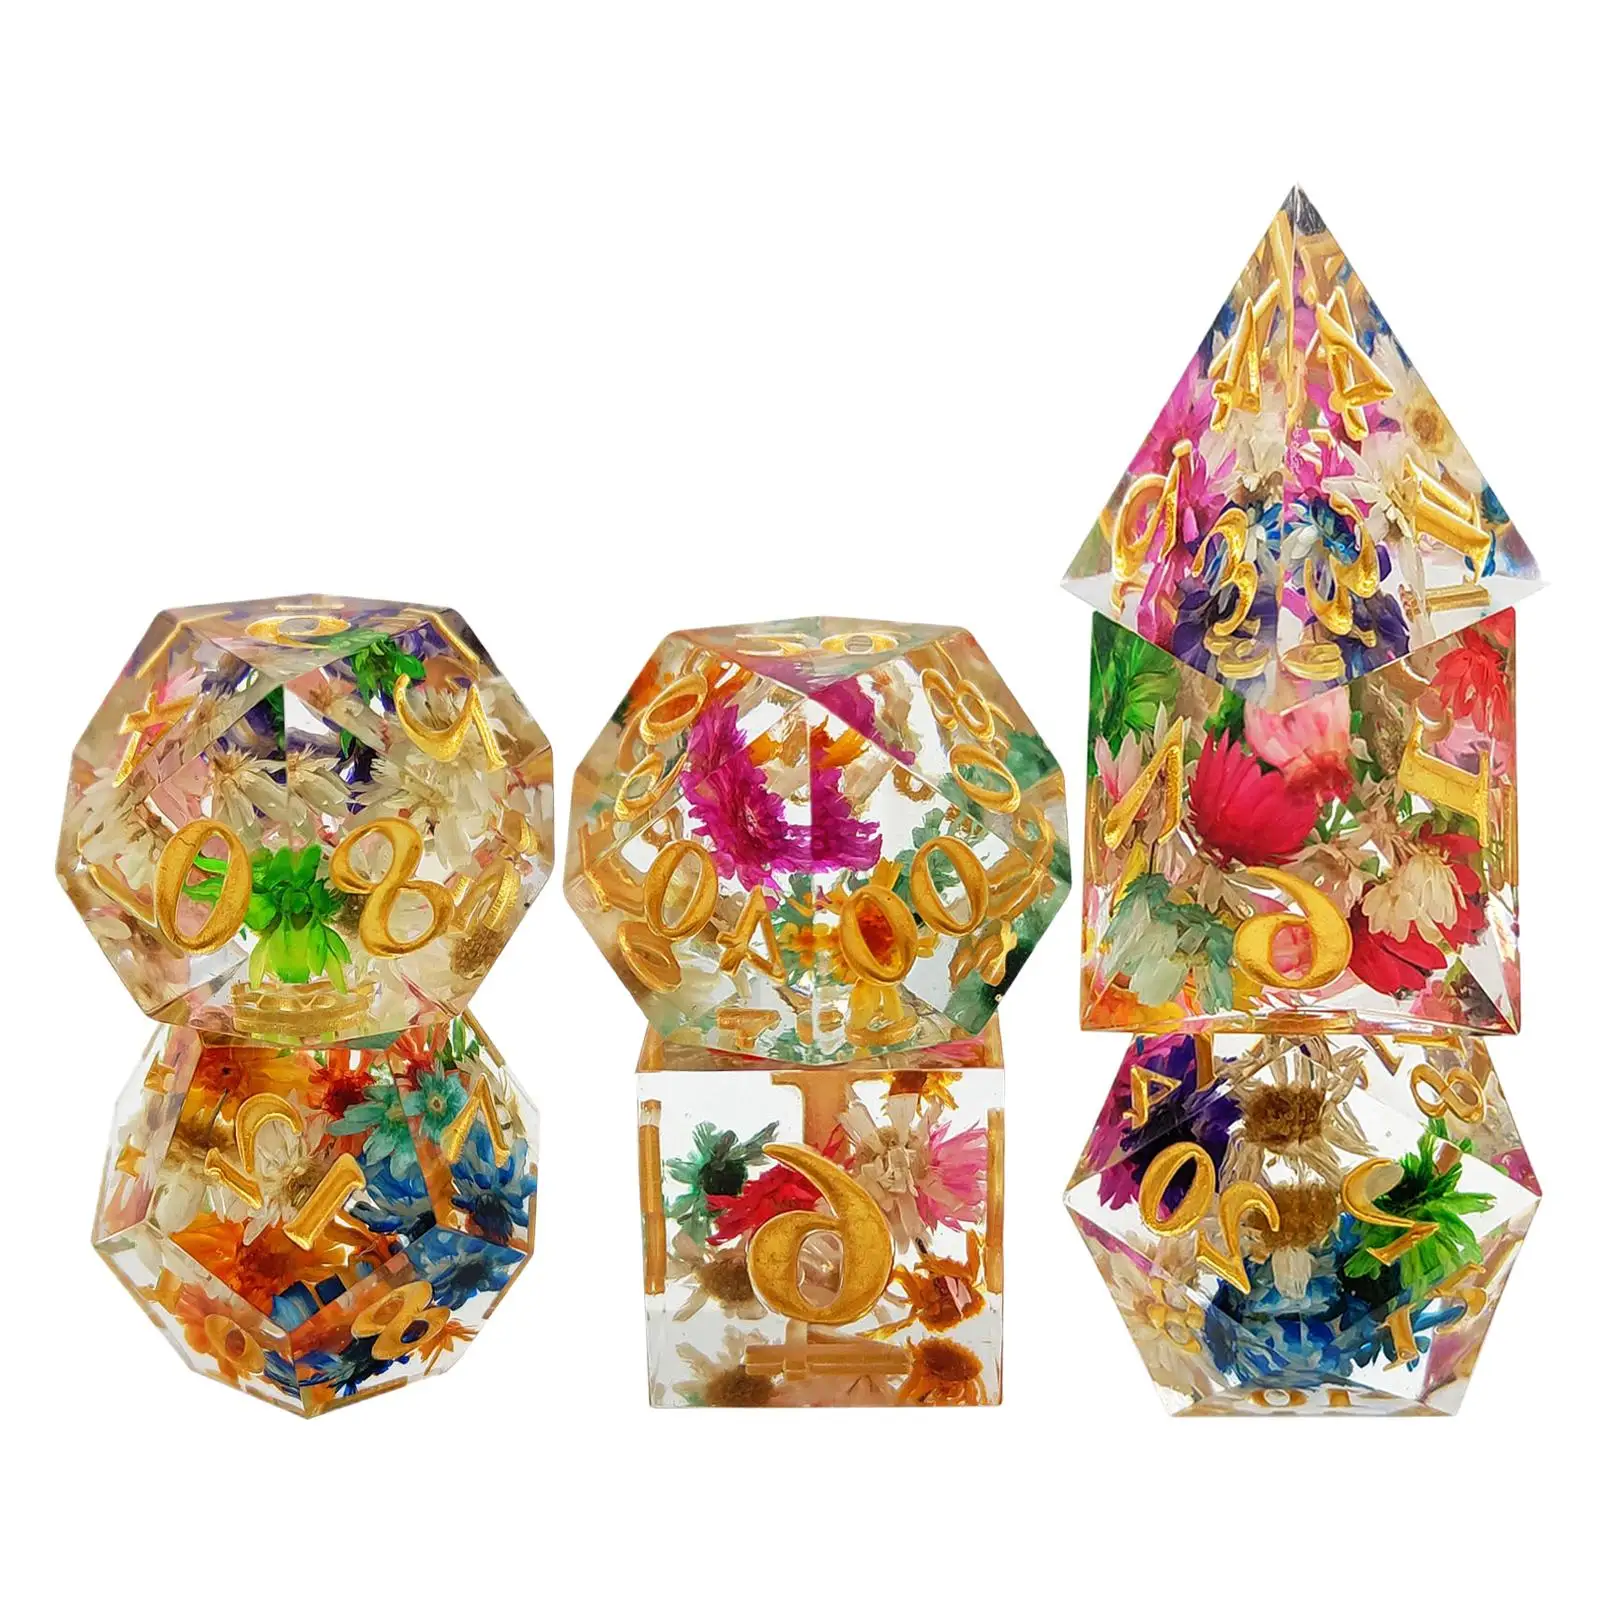 7x Polyhedral Dices Set Transparent Flower Engraved Game Dices for Parties